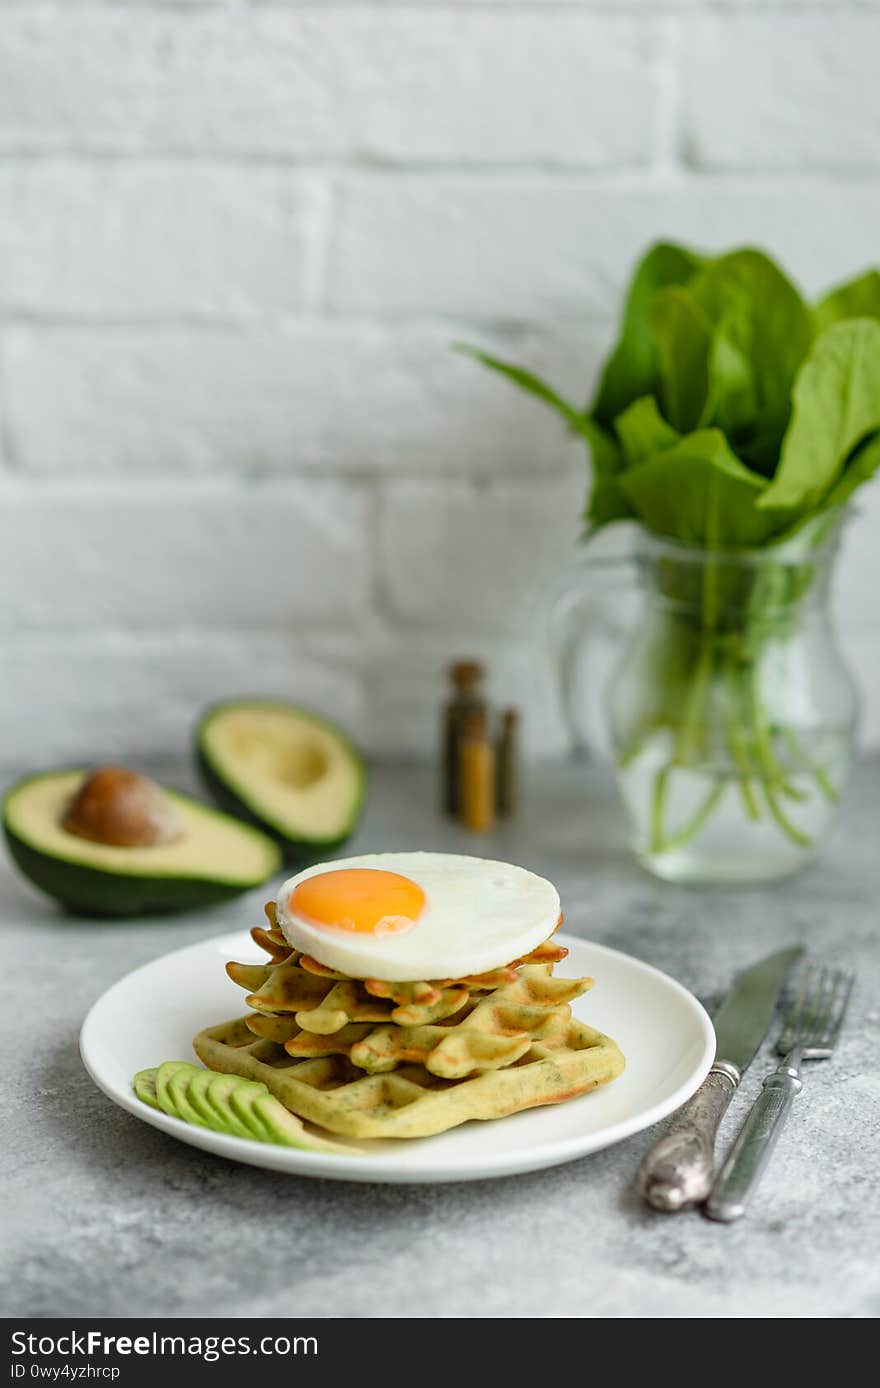 Fresh delicious and nutritious breakfast with waffles with spinach, fried egg and avocado pieces